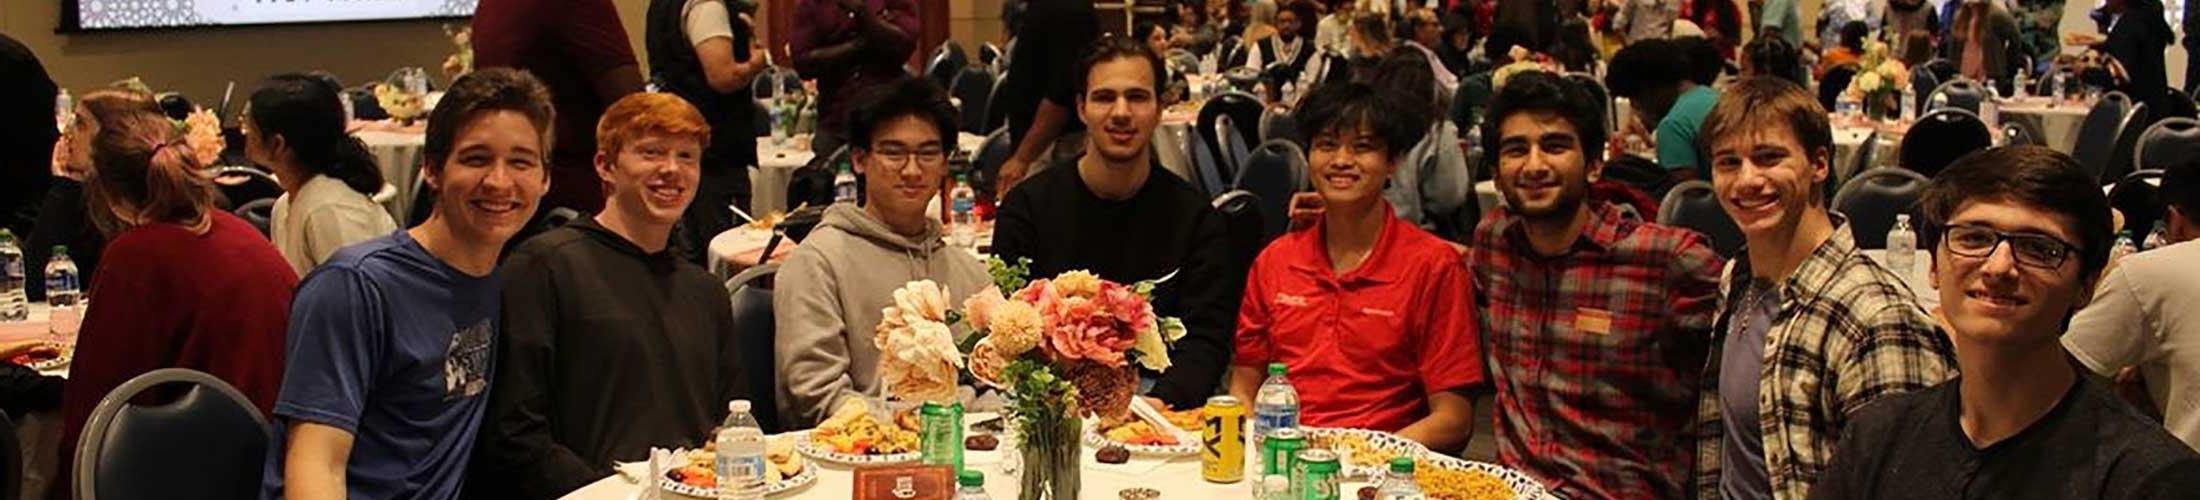 Group of 学生 sitting at a round table eating at event.